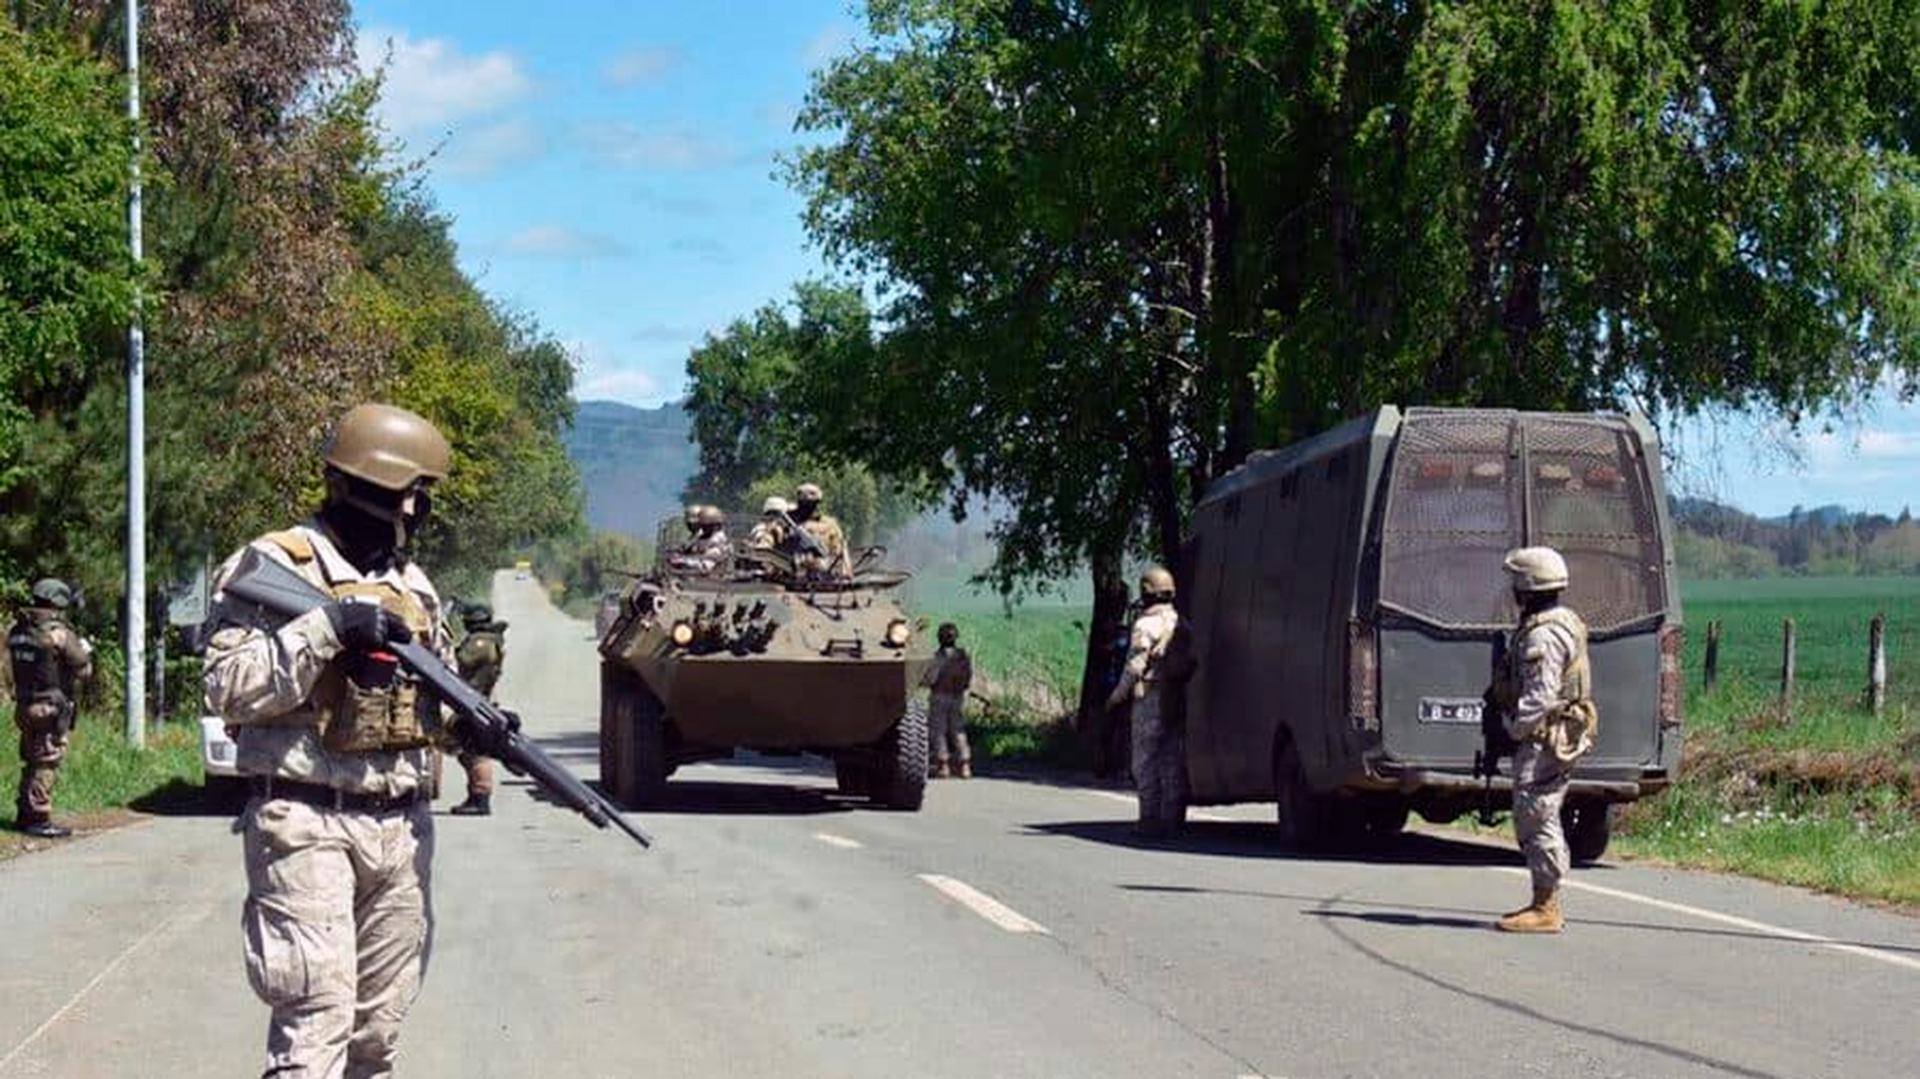 The Chilean government deployed a strong security operation in the south of the country in the face of continued Mapuche attacks.